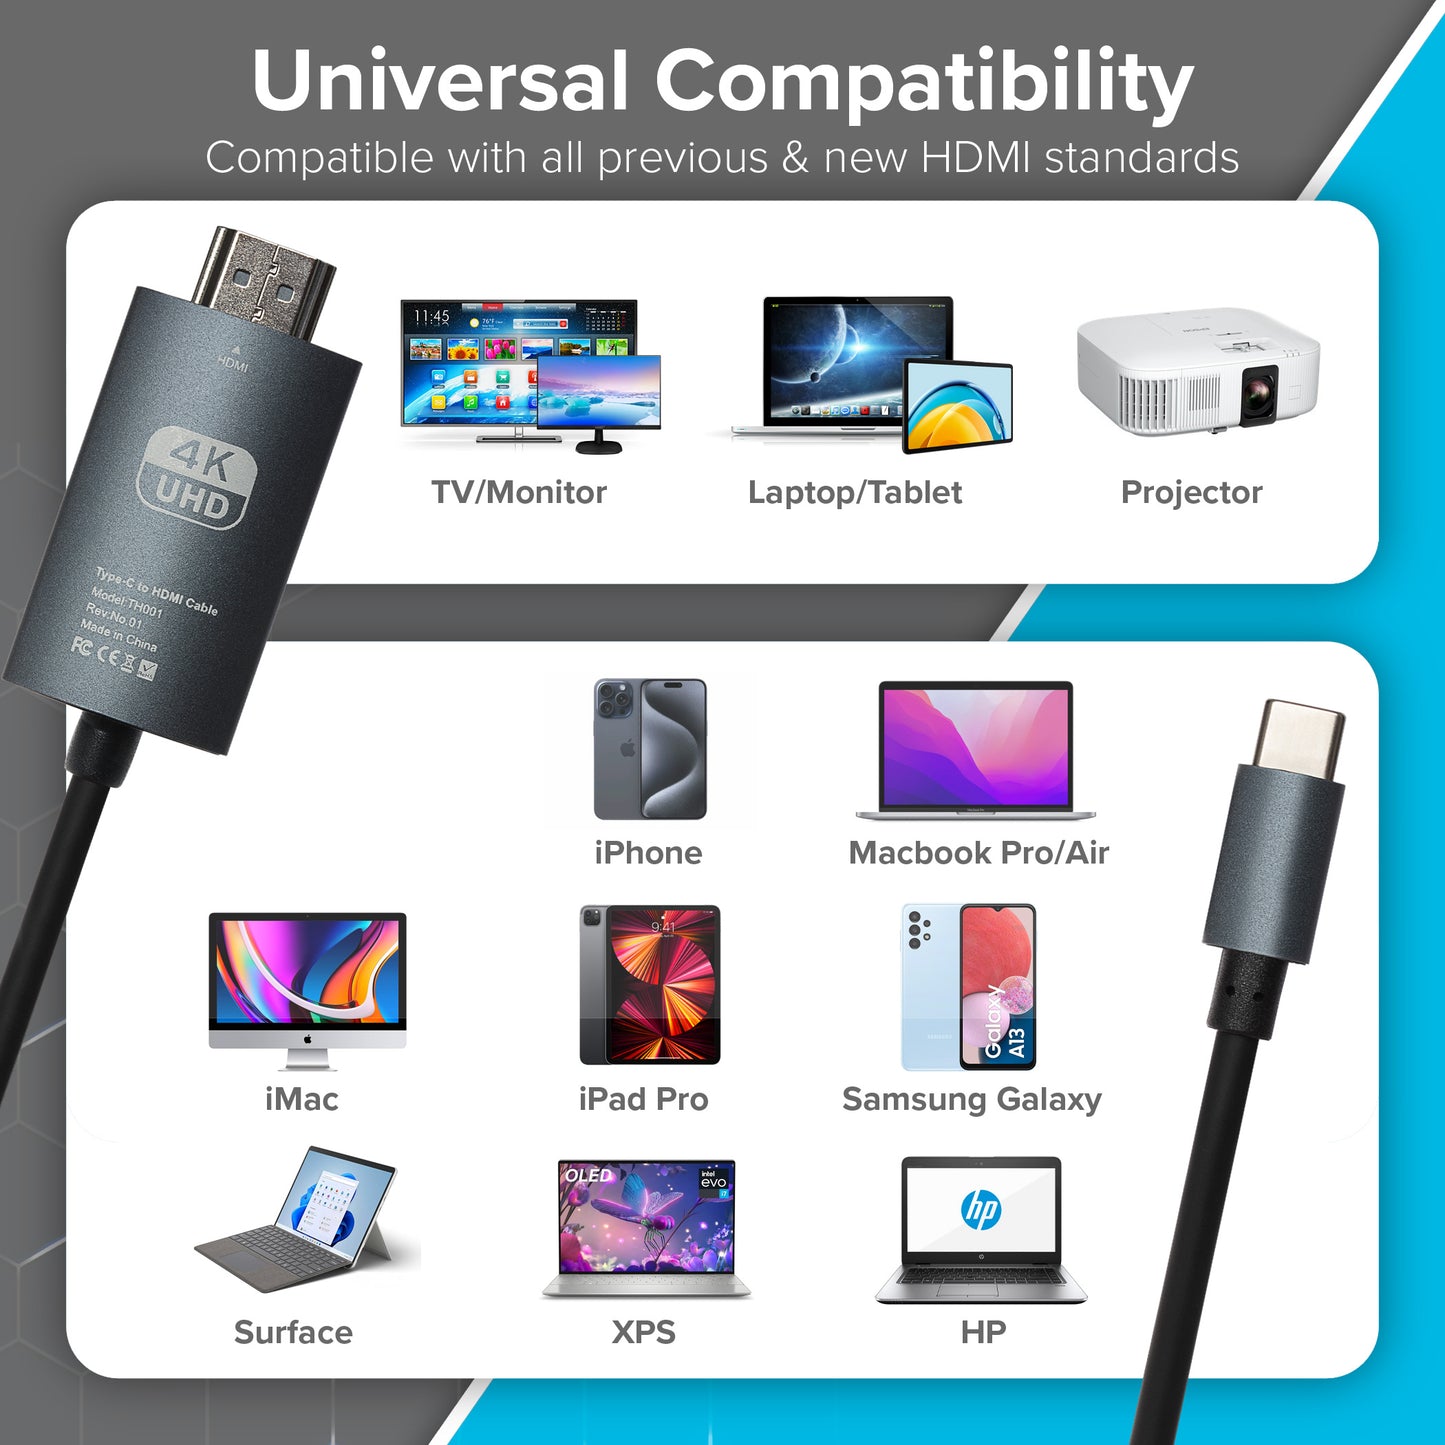 Maplin USB-C to HDMI Cable Adapter (Supports 4K Ultra HD @ 60Hz) - Black